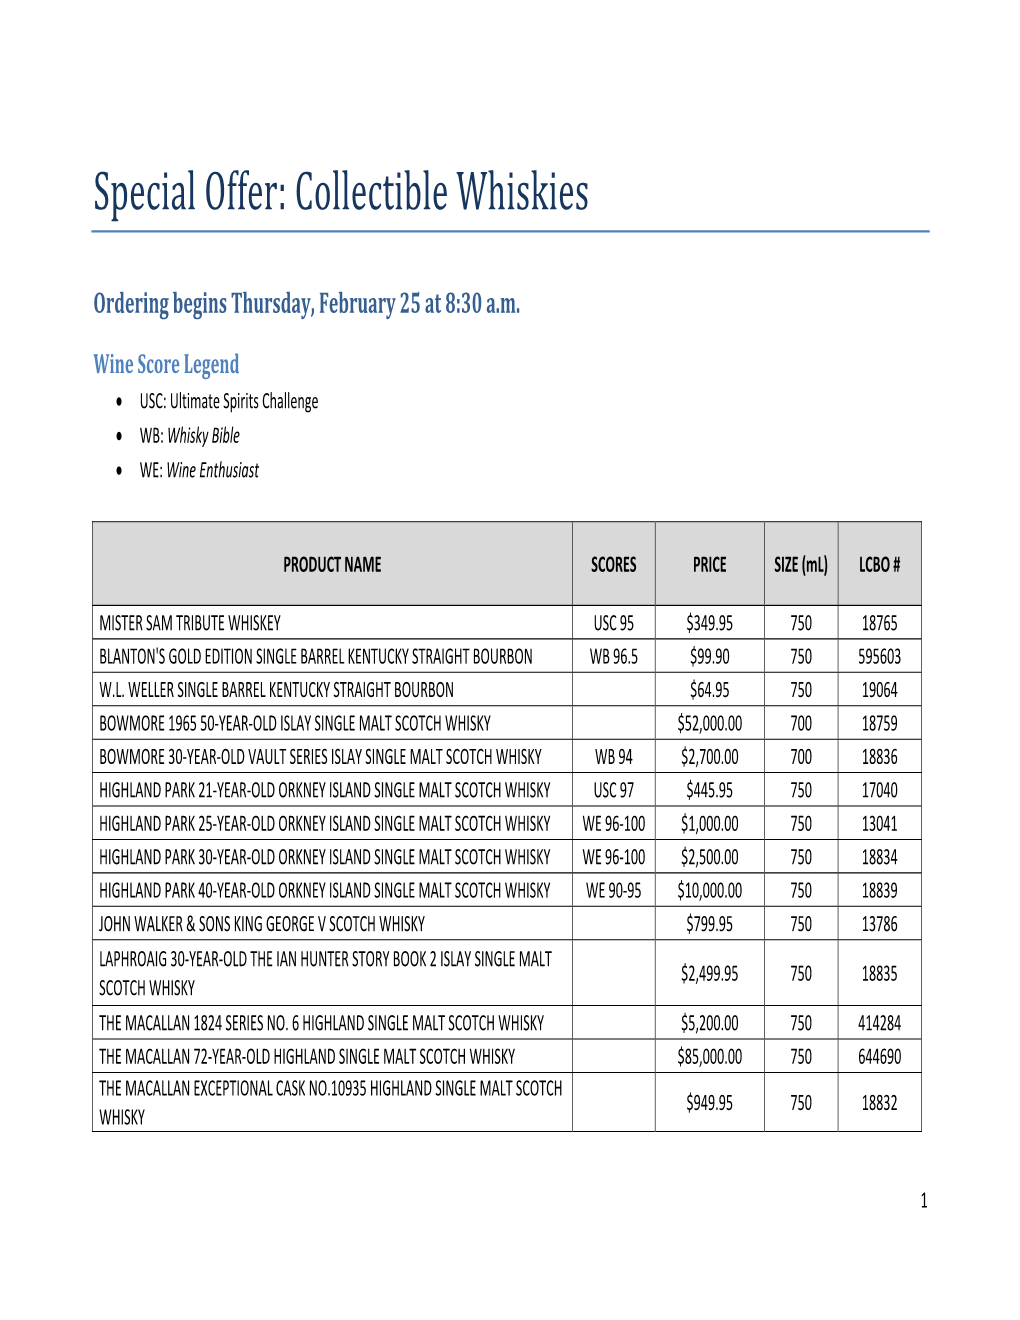 Collectible Whiskies